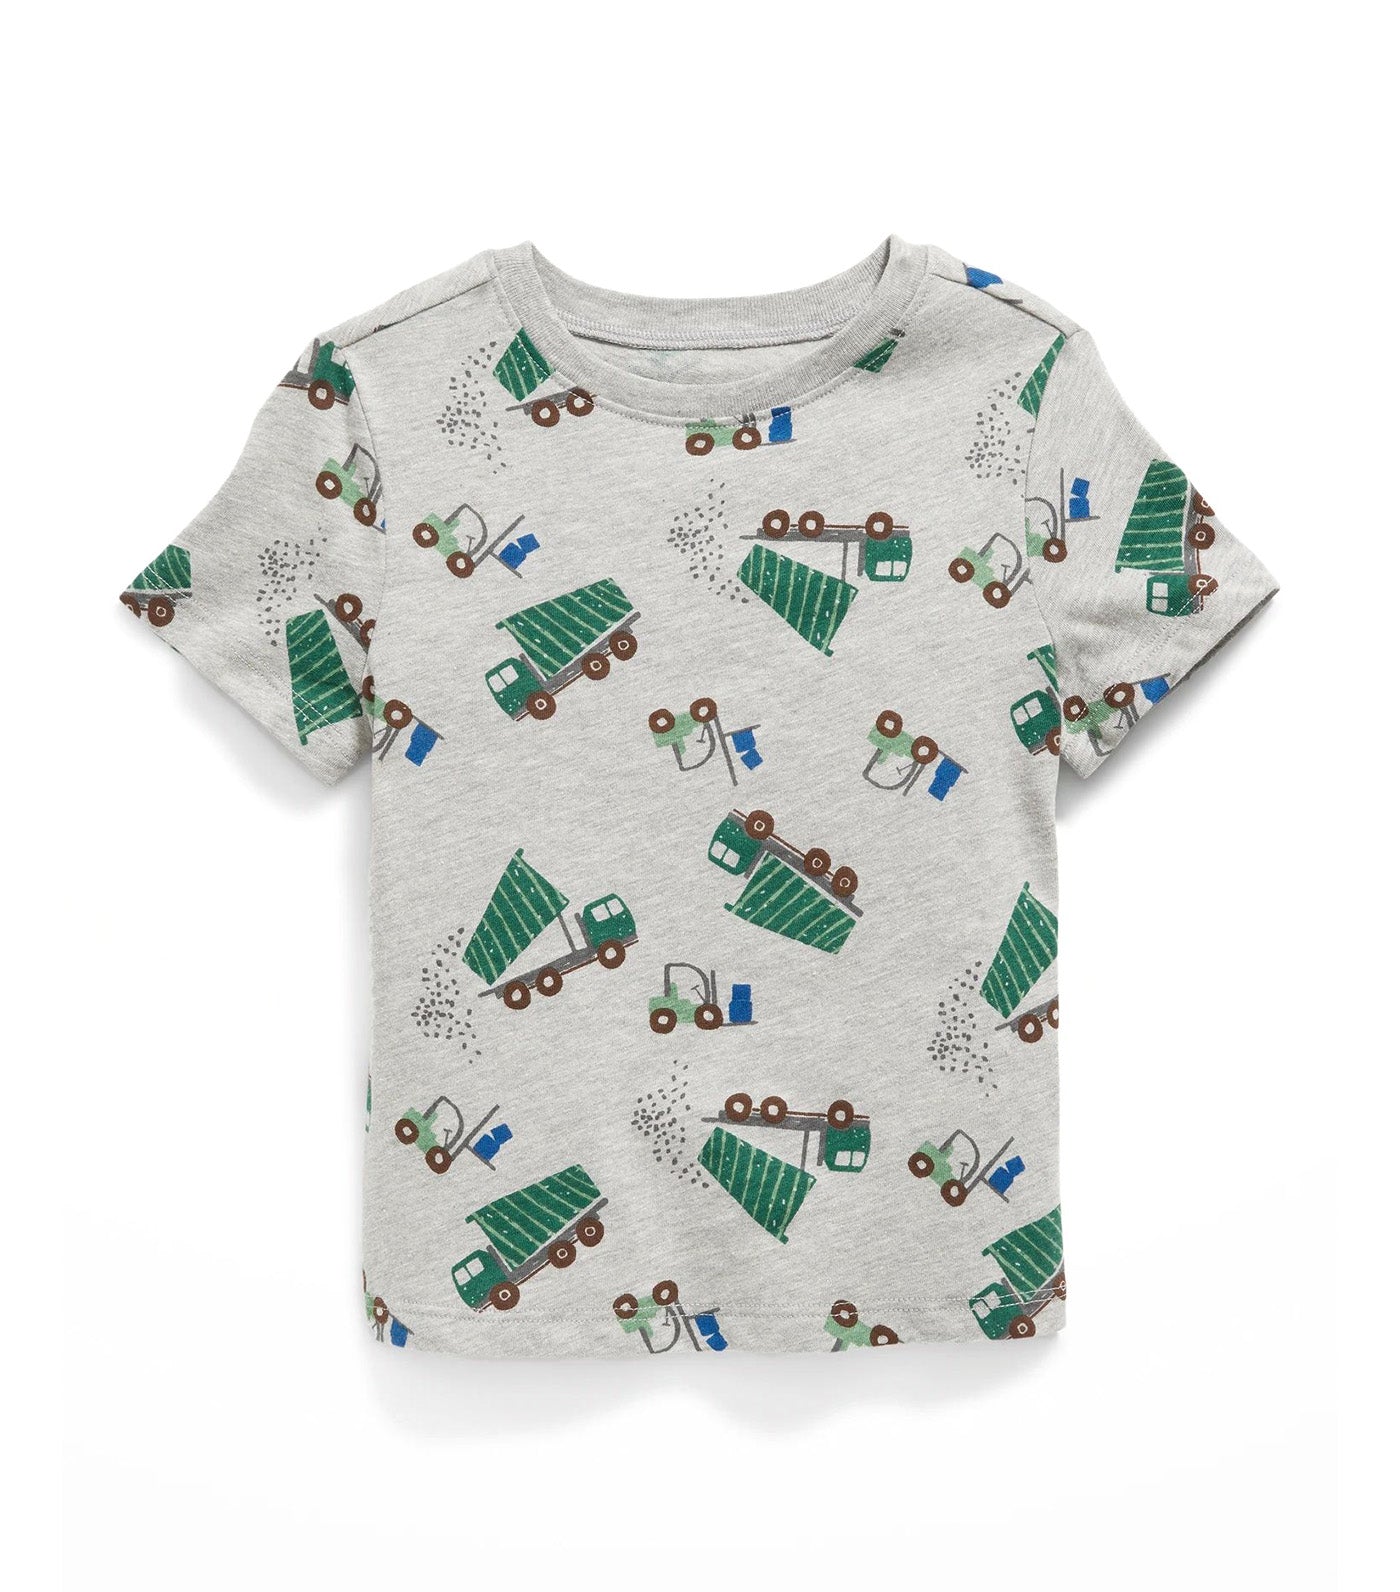 Unisex Printed T-Shirt for Toddler - Truck Green